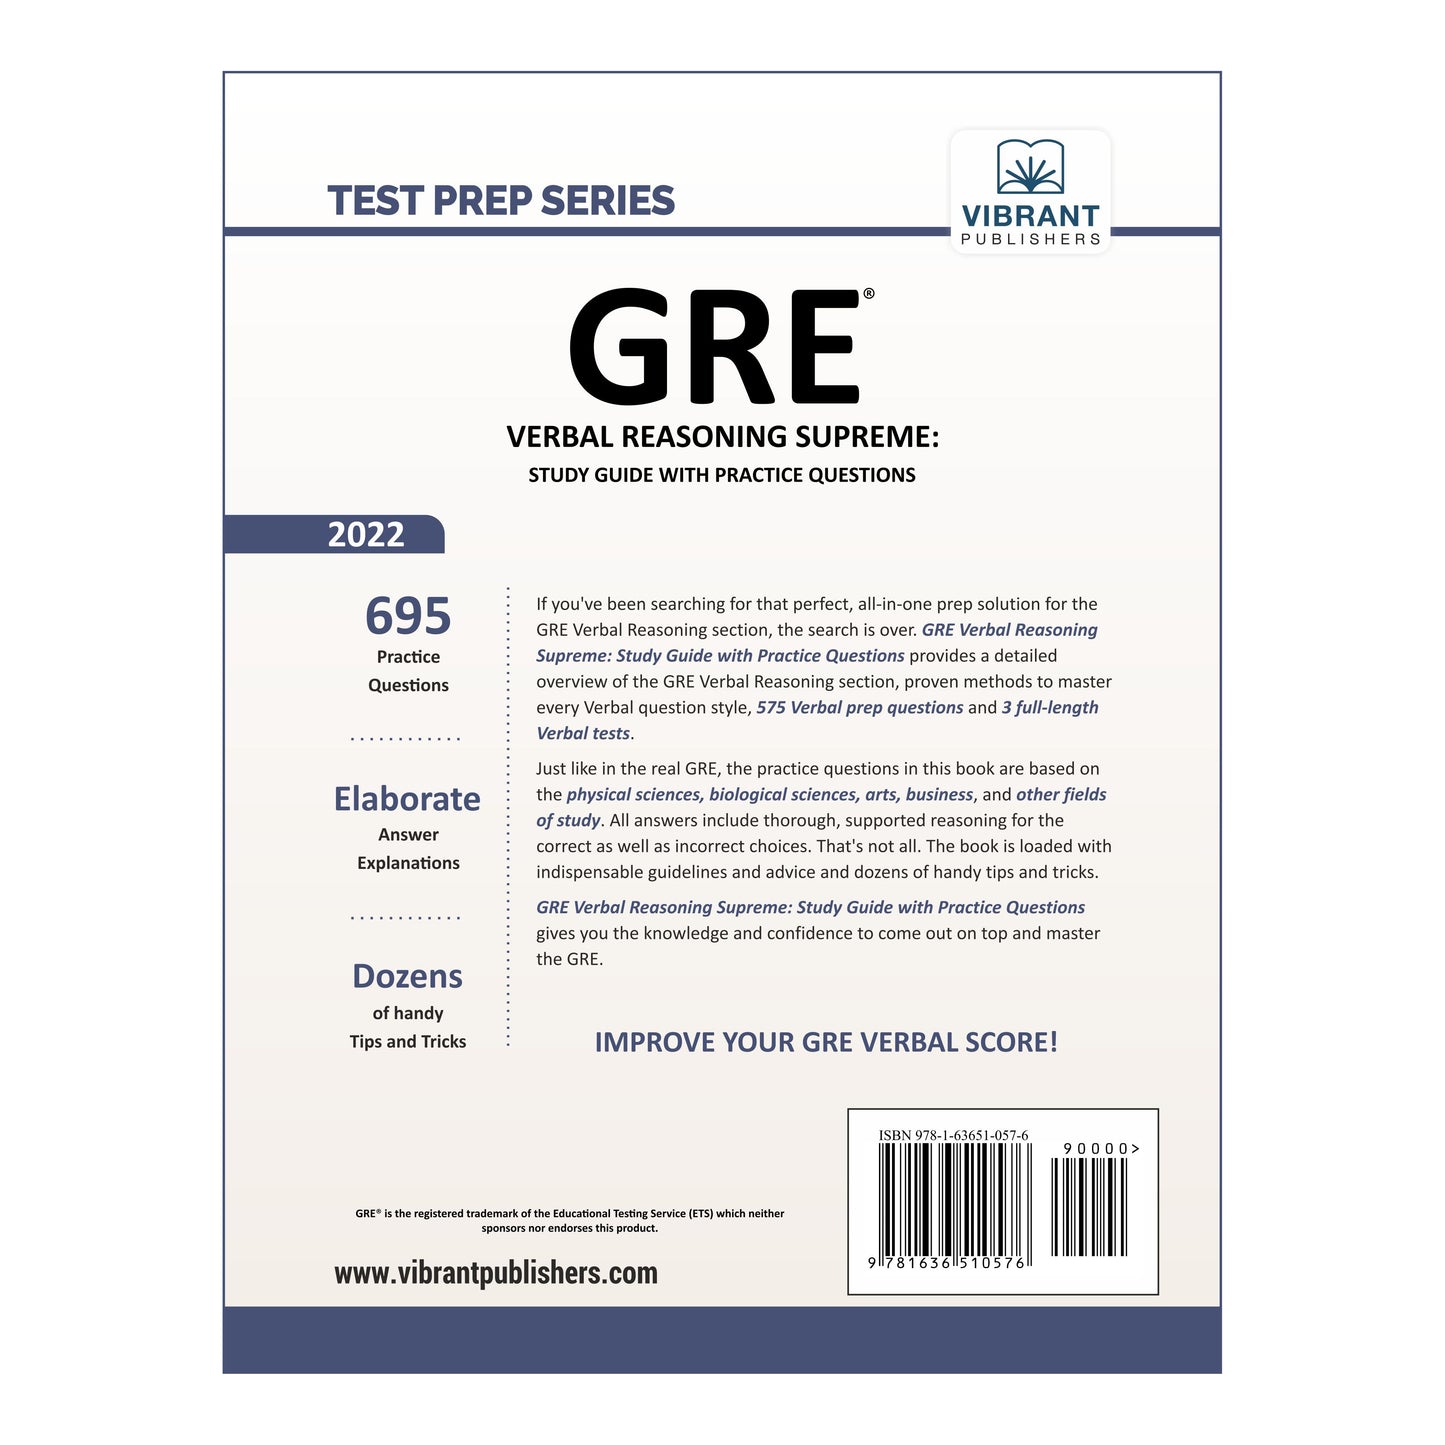 GRE Verbal Reasoning Supreme: Study Guide with Practice Questions (2022 Edition)